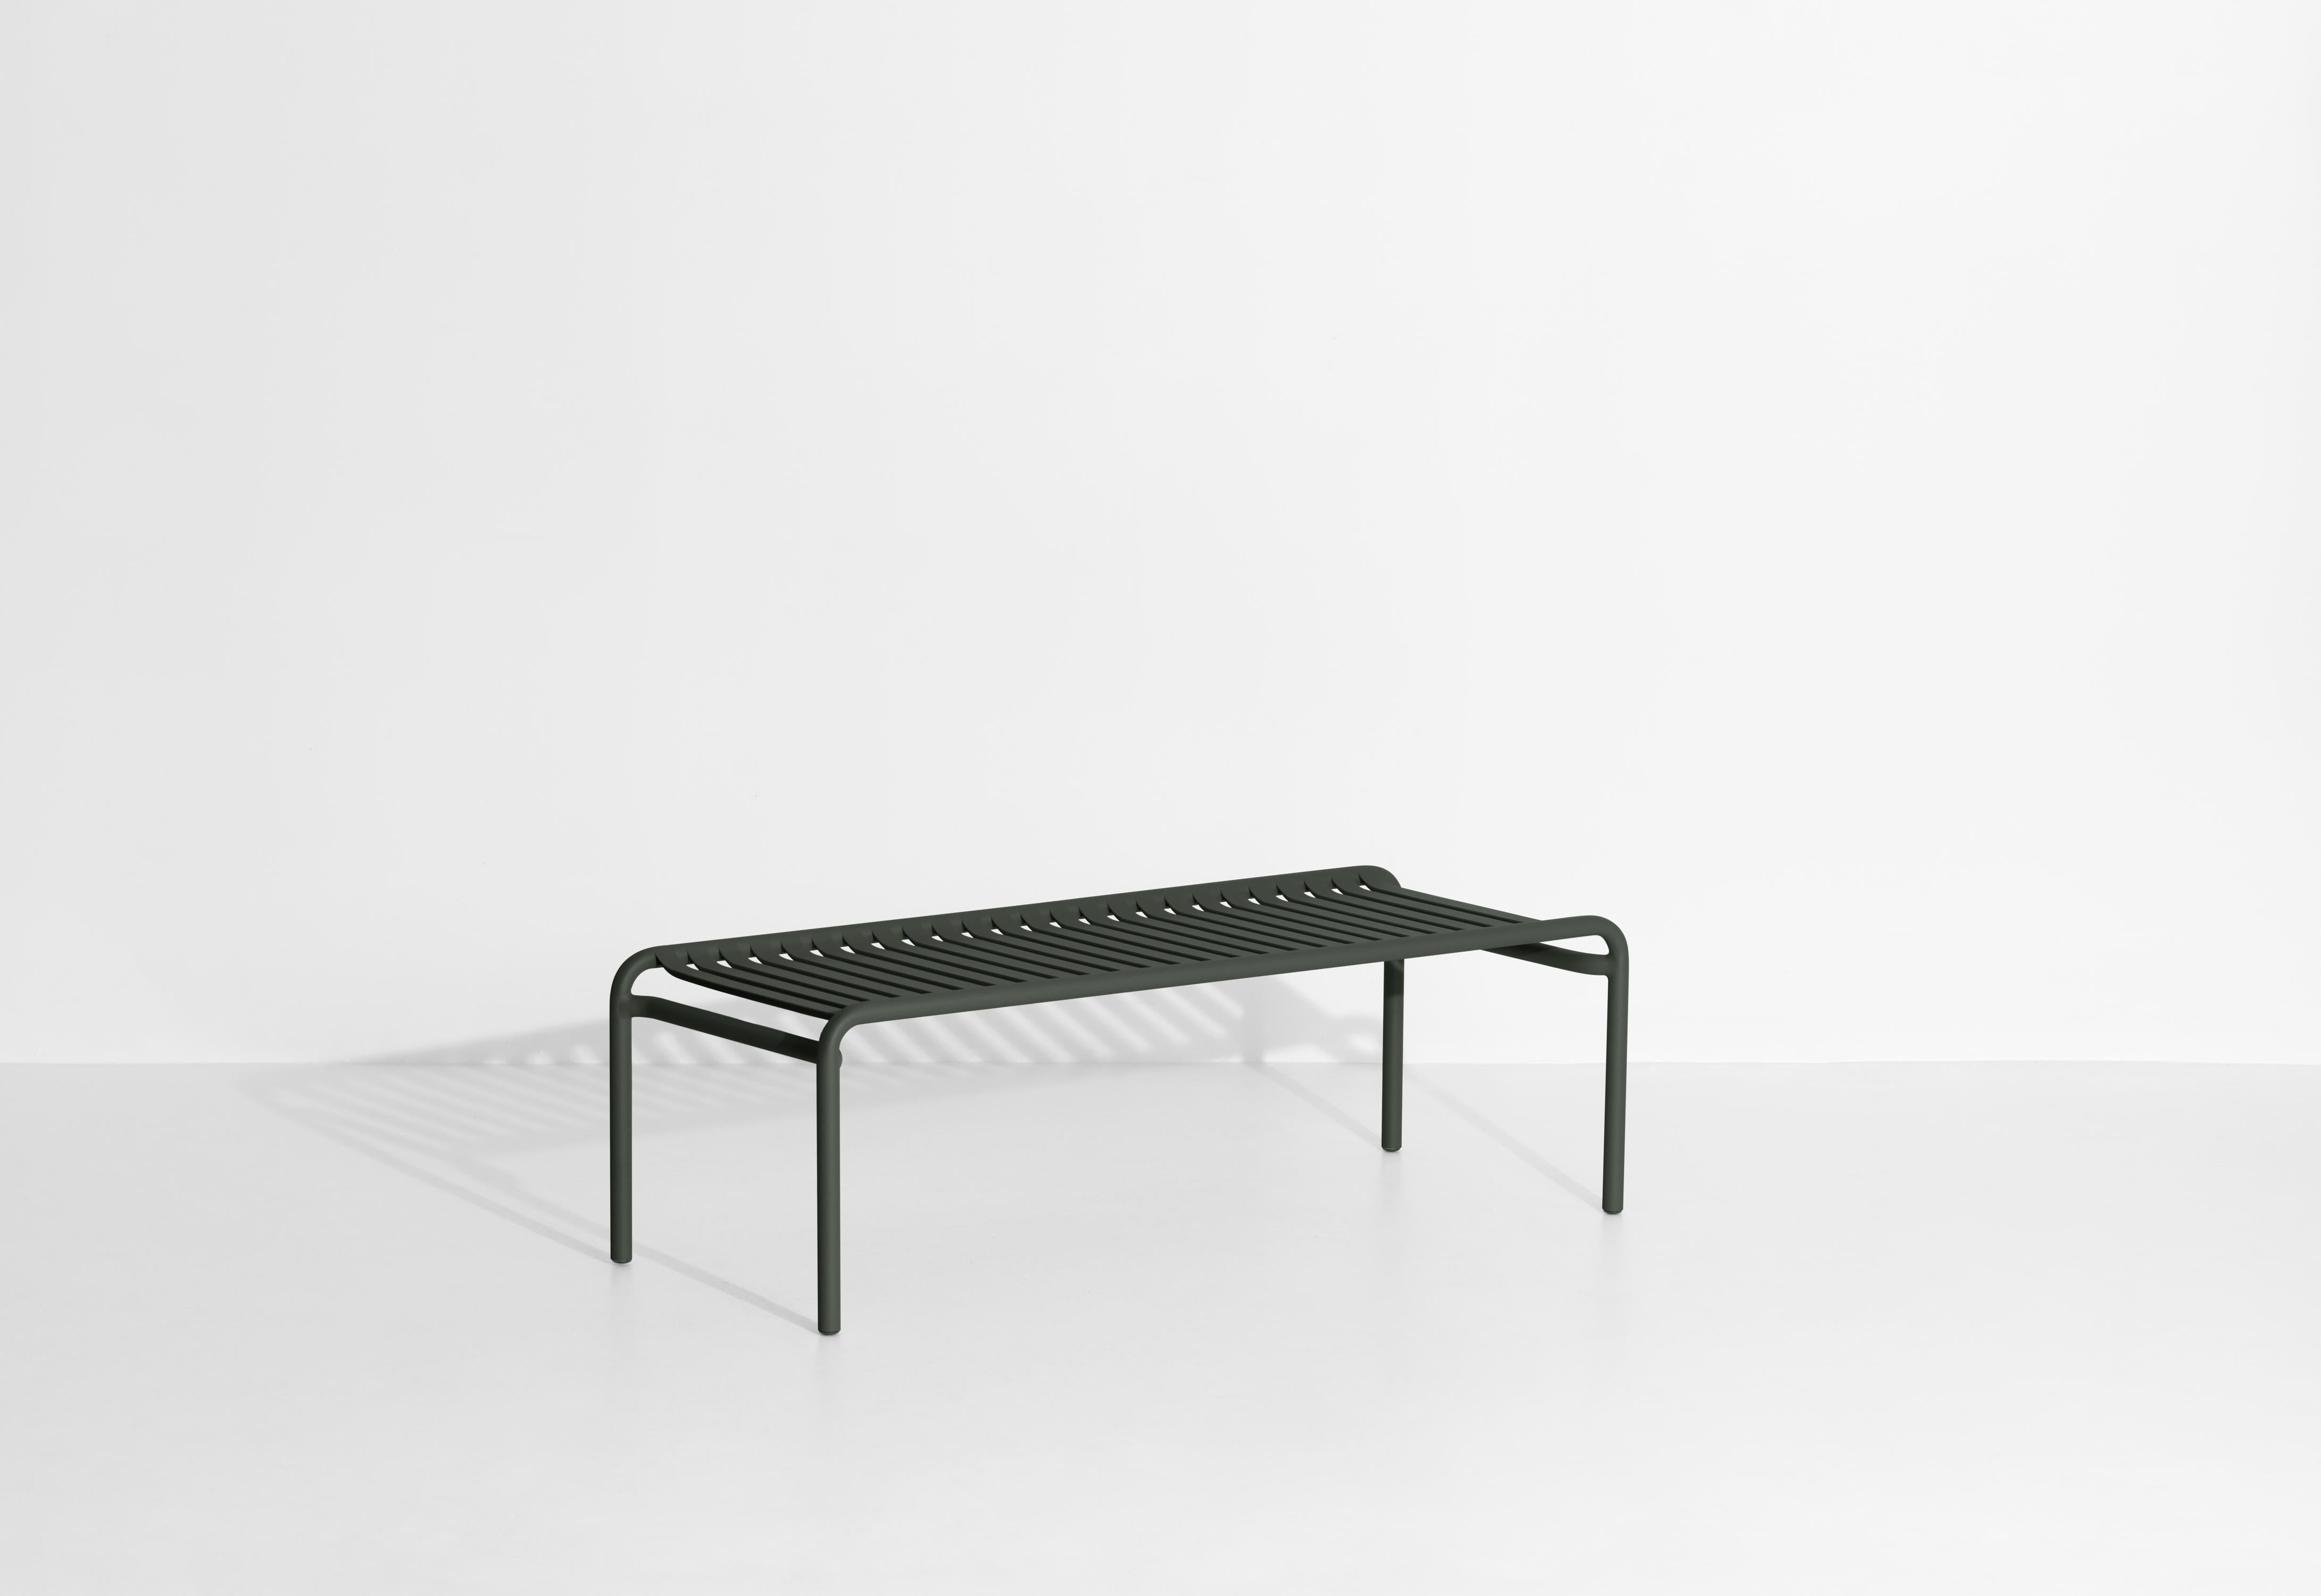 Petite Friture Week-End Long Coffee Table in Glass Green Aluminium, 2017 In New Condition For Sale In Brooklyn, NY